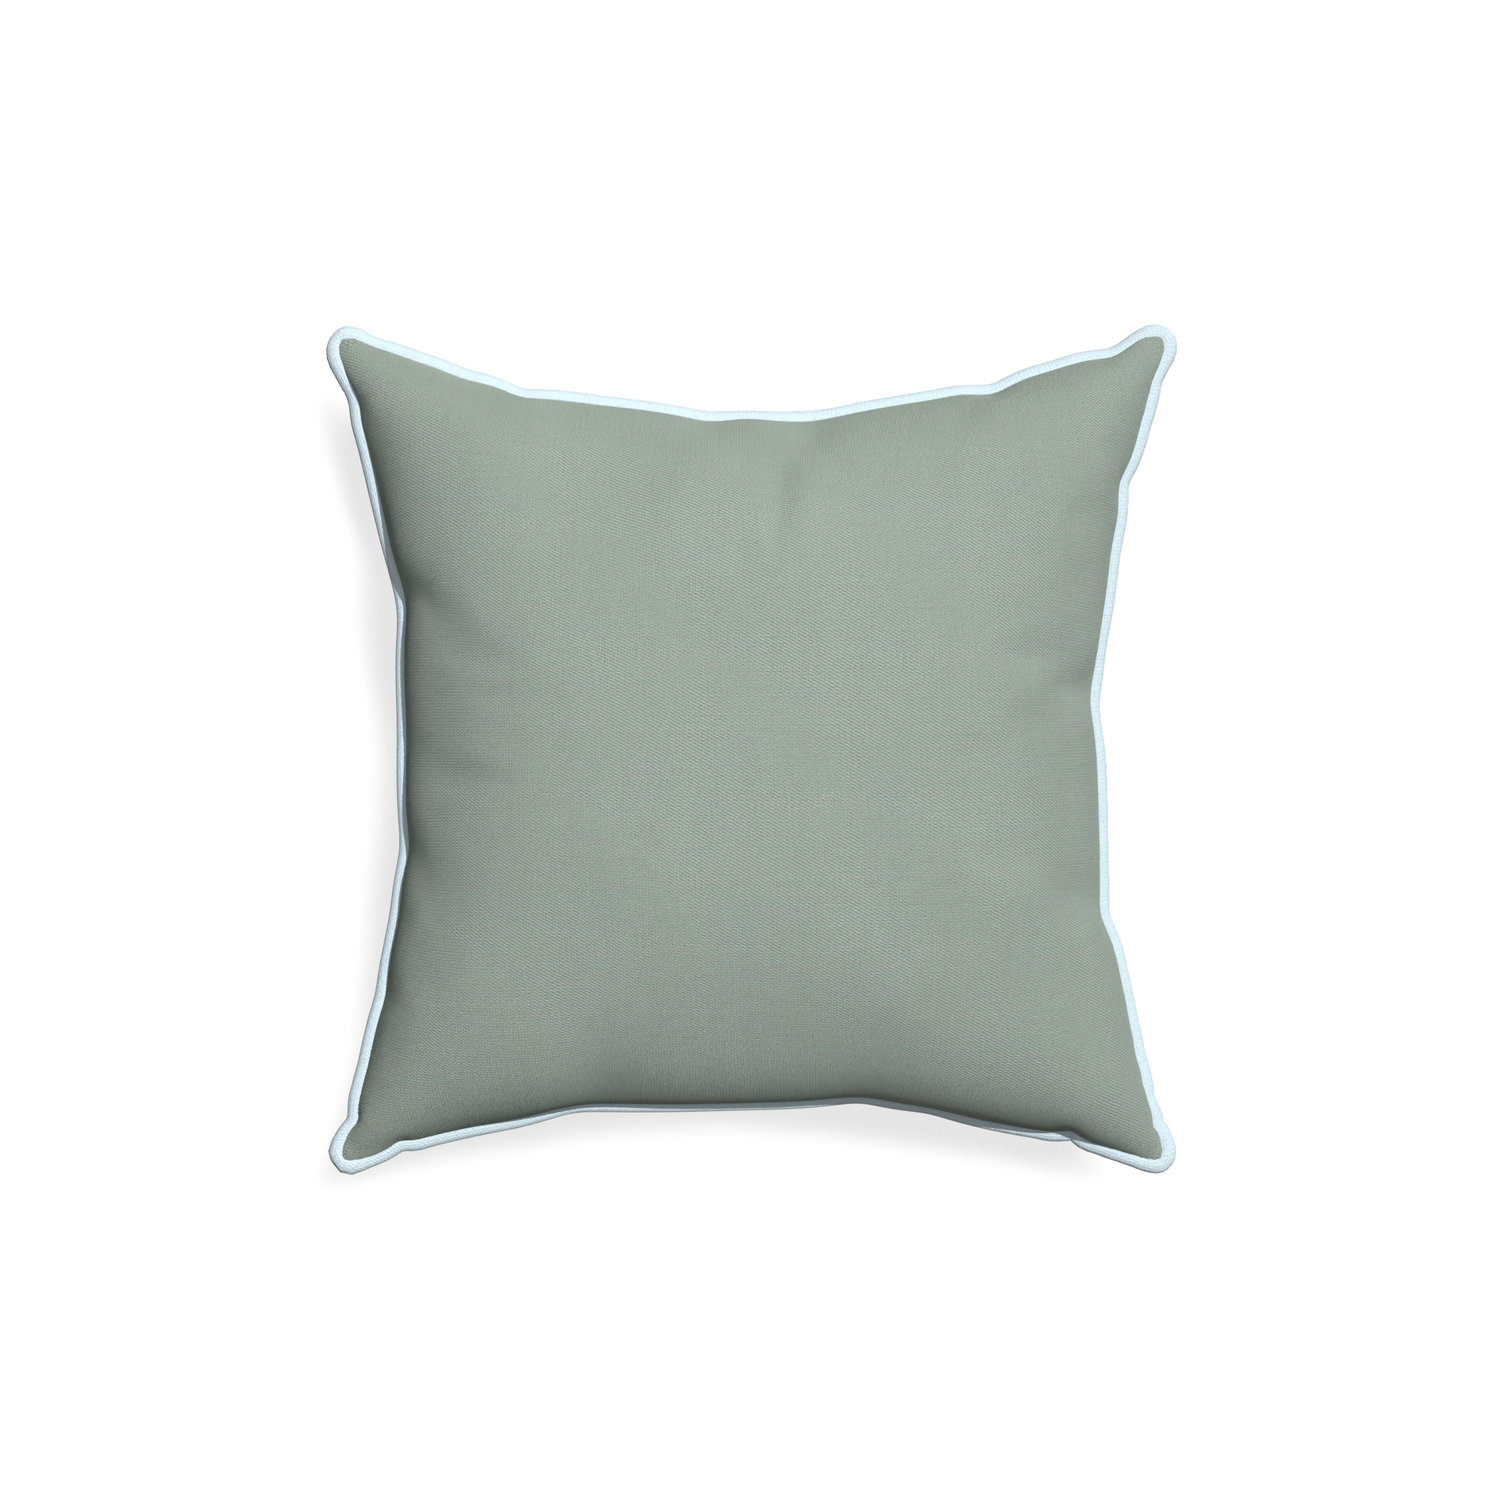 18-square sage custom sage green cottonpillow with powder piping on white background